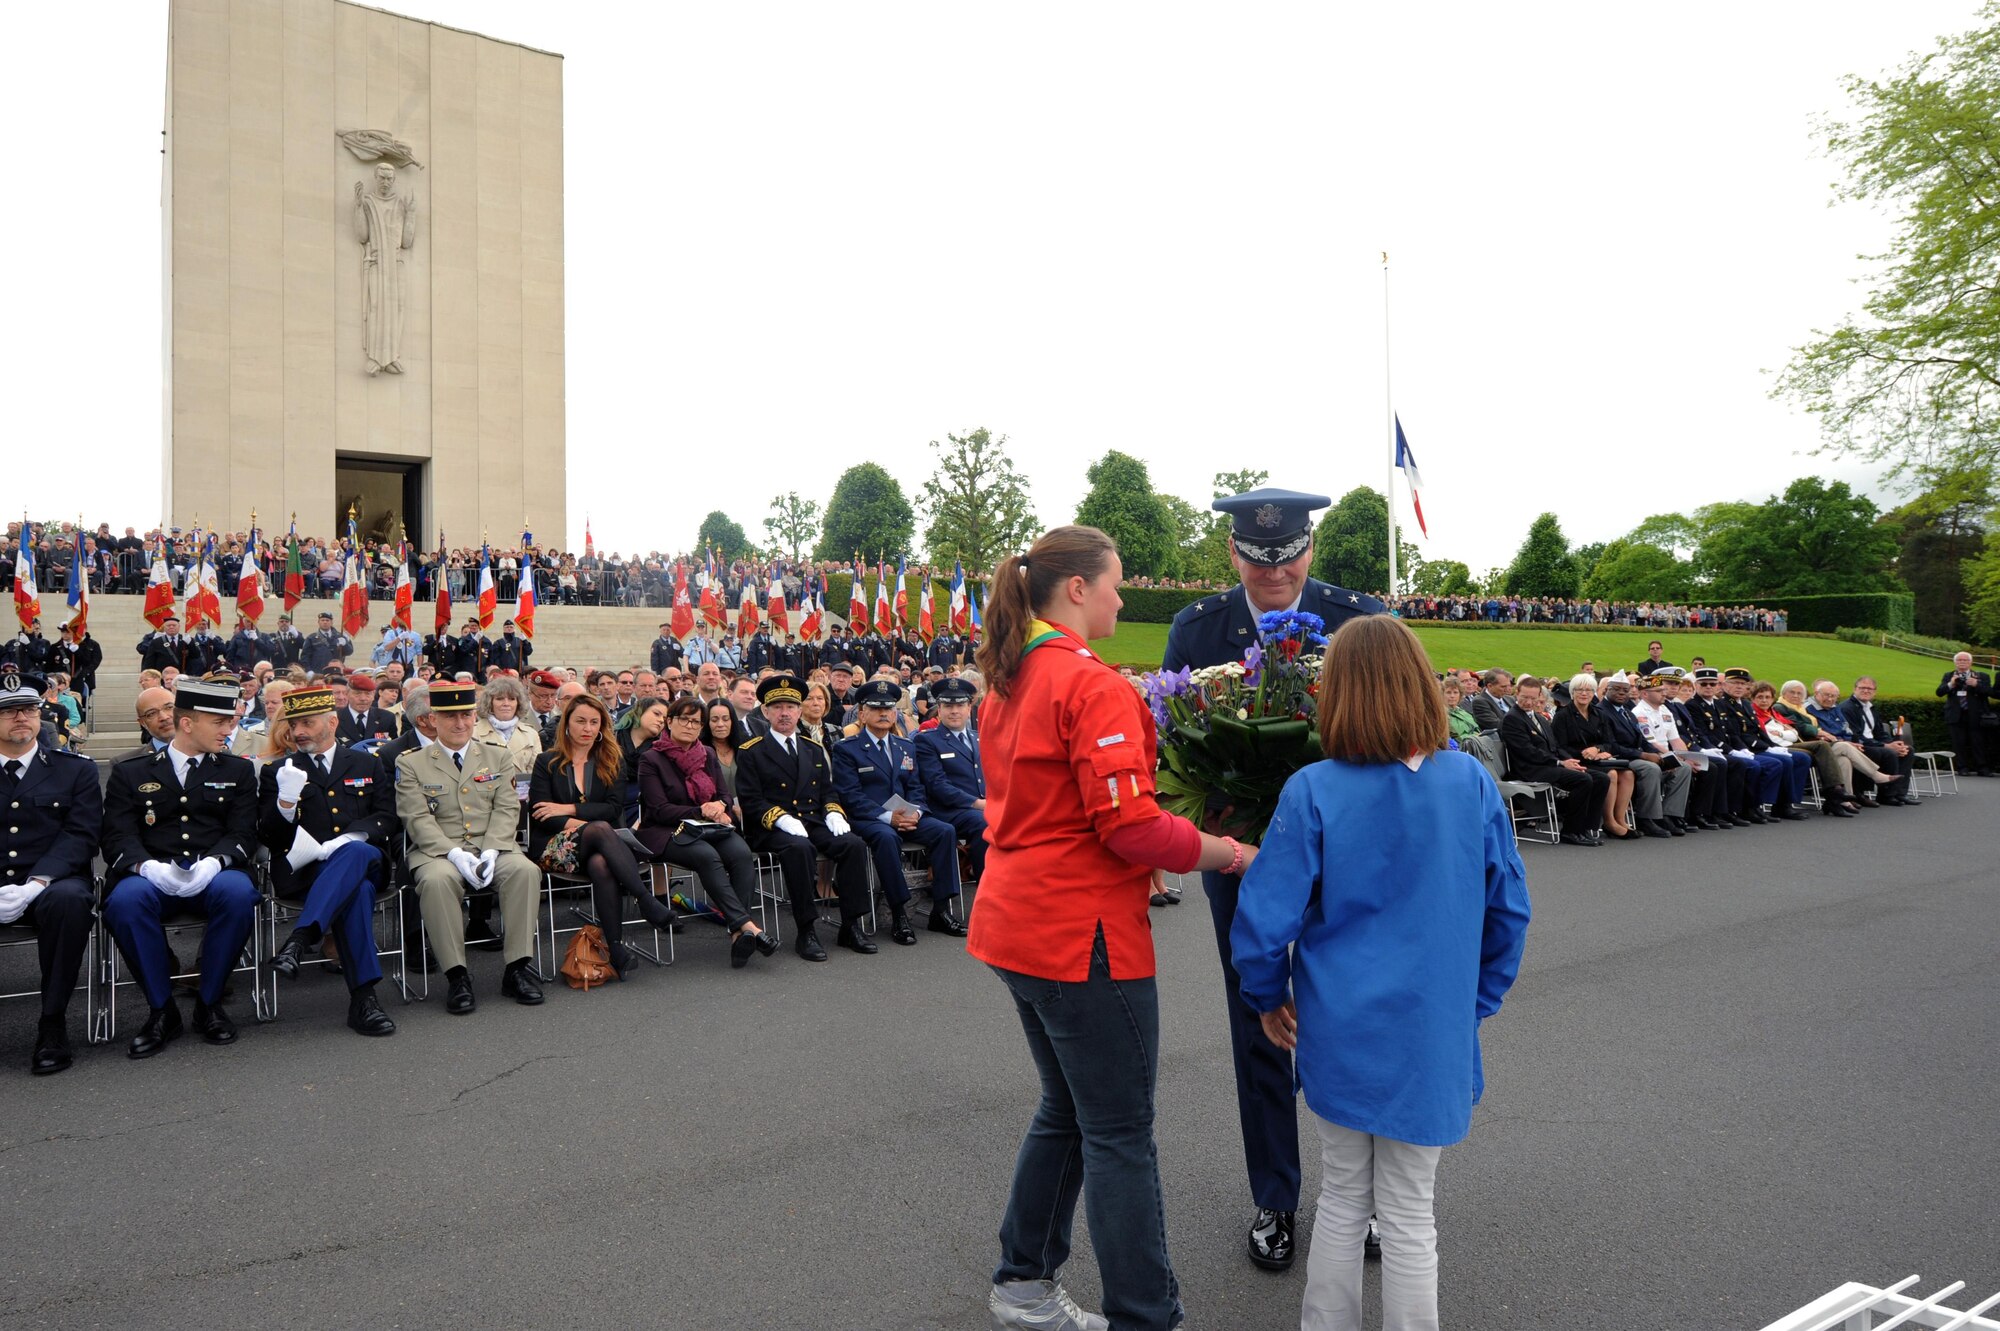 French Girl Scout members present a wreath to Brig. Gen. Jon Thomas, 86th Airlift Wing commander, during a Memorial Day ceremony May 29, 2016, at Lorraine American Cemetery and Memorial, in St. Avold, France. Memorial Day commemorates fallen servicemembers. (U.S. Air Force photo/Staff Sgt. Sharida Jackson)